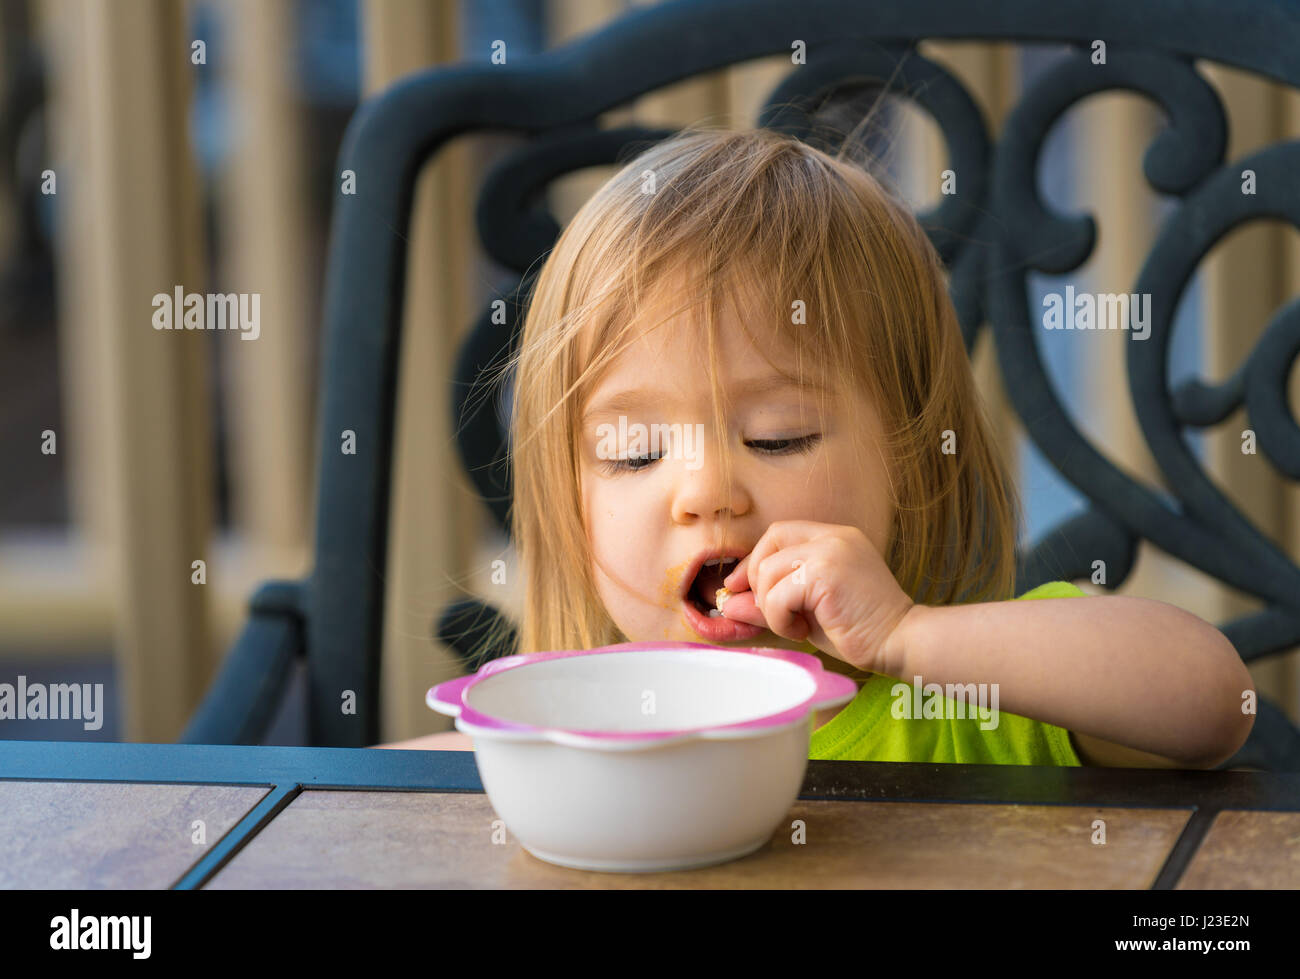 Baby girl, toddler child eating with hands and fingers from bowl on outdoor table Stock Photo